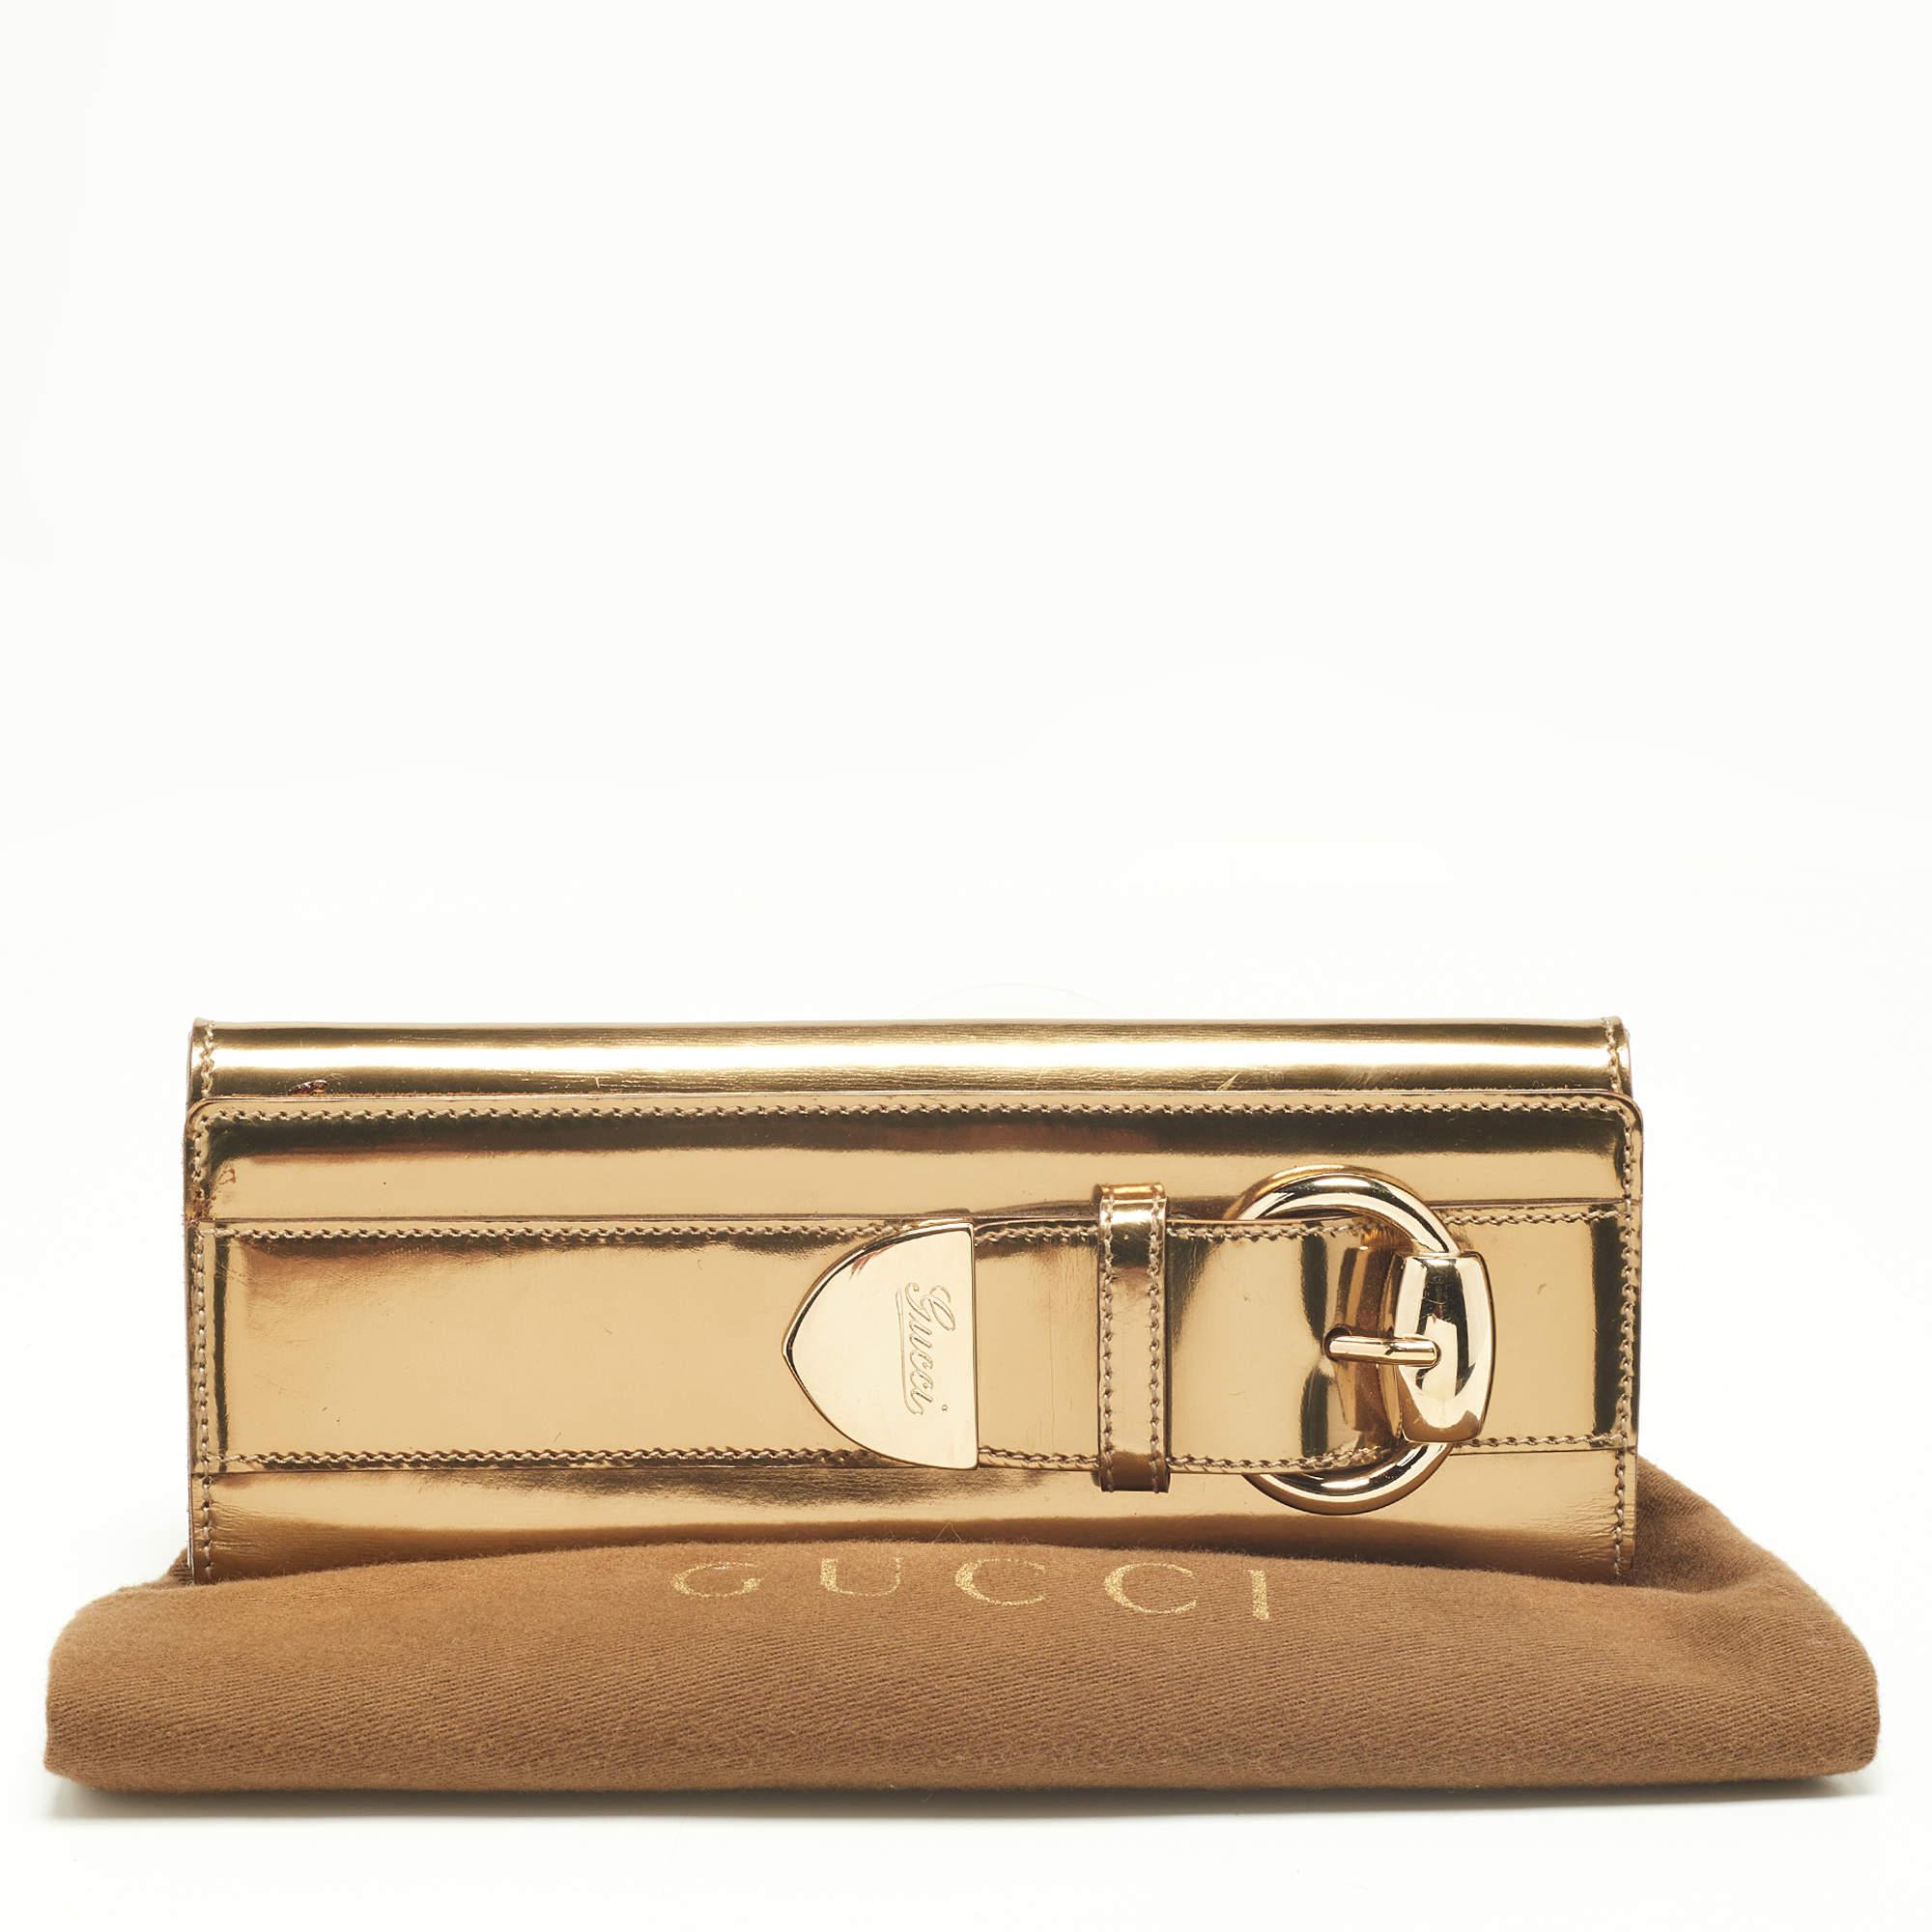 Gucci Gold Patent Leather Buckle Continental Wallet 9